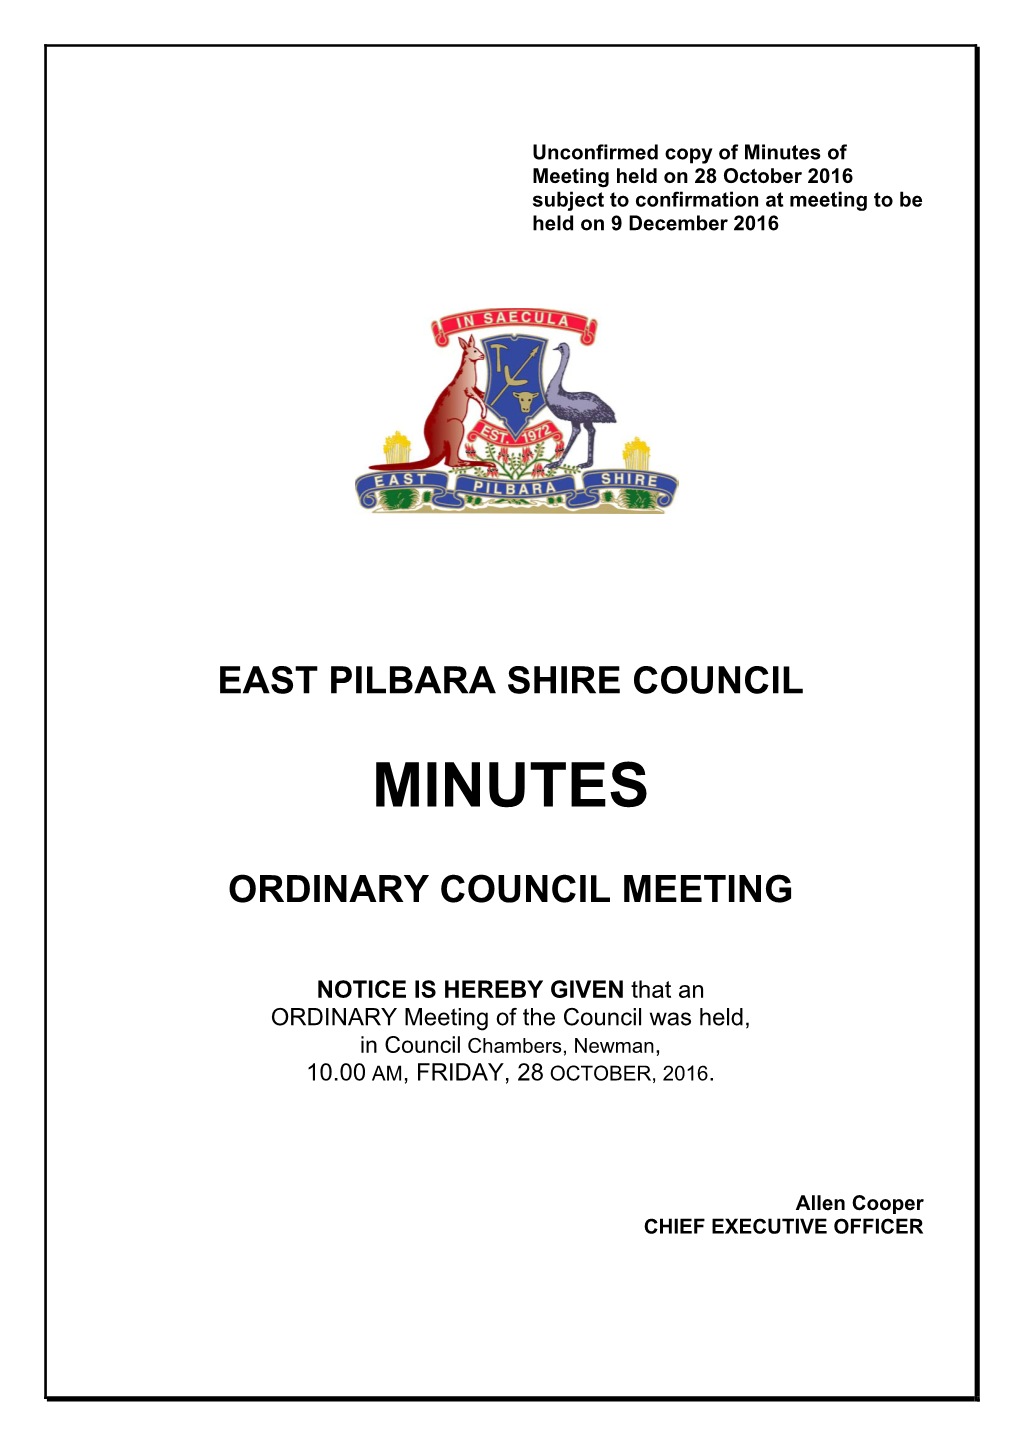 Minutes of Meeting Held on 28 October 2016 Subject to Confirmation at Meeting to Be Held on 9 December 2016